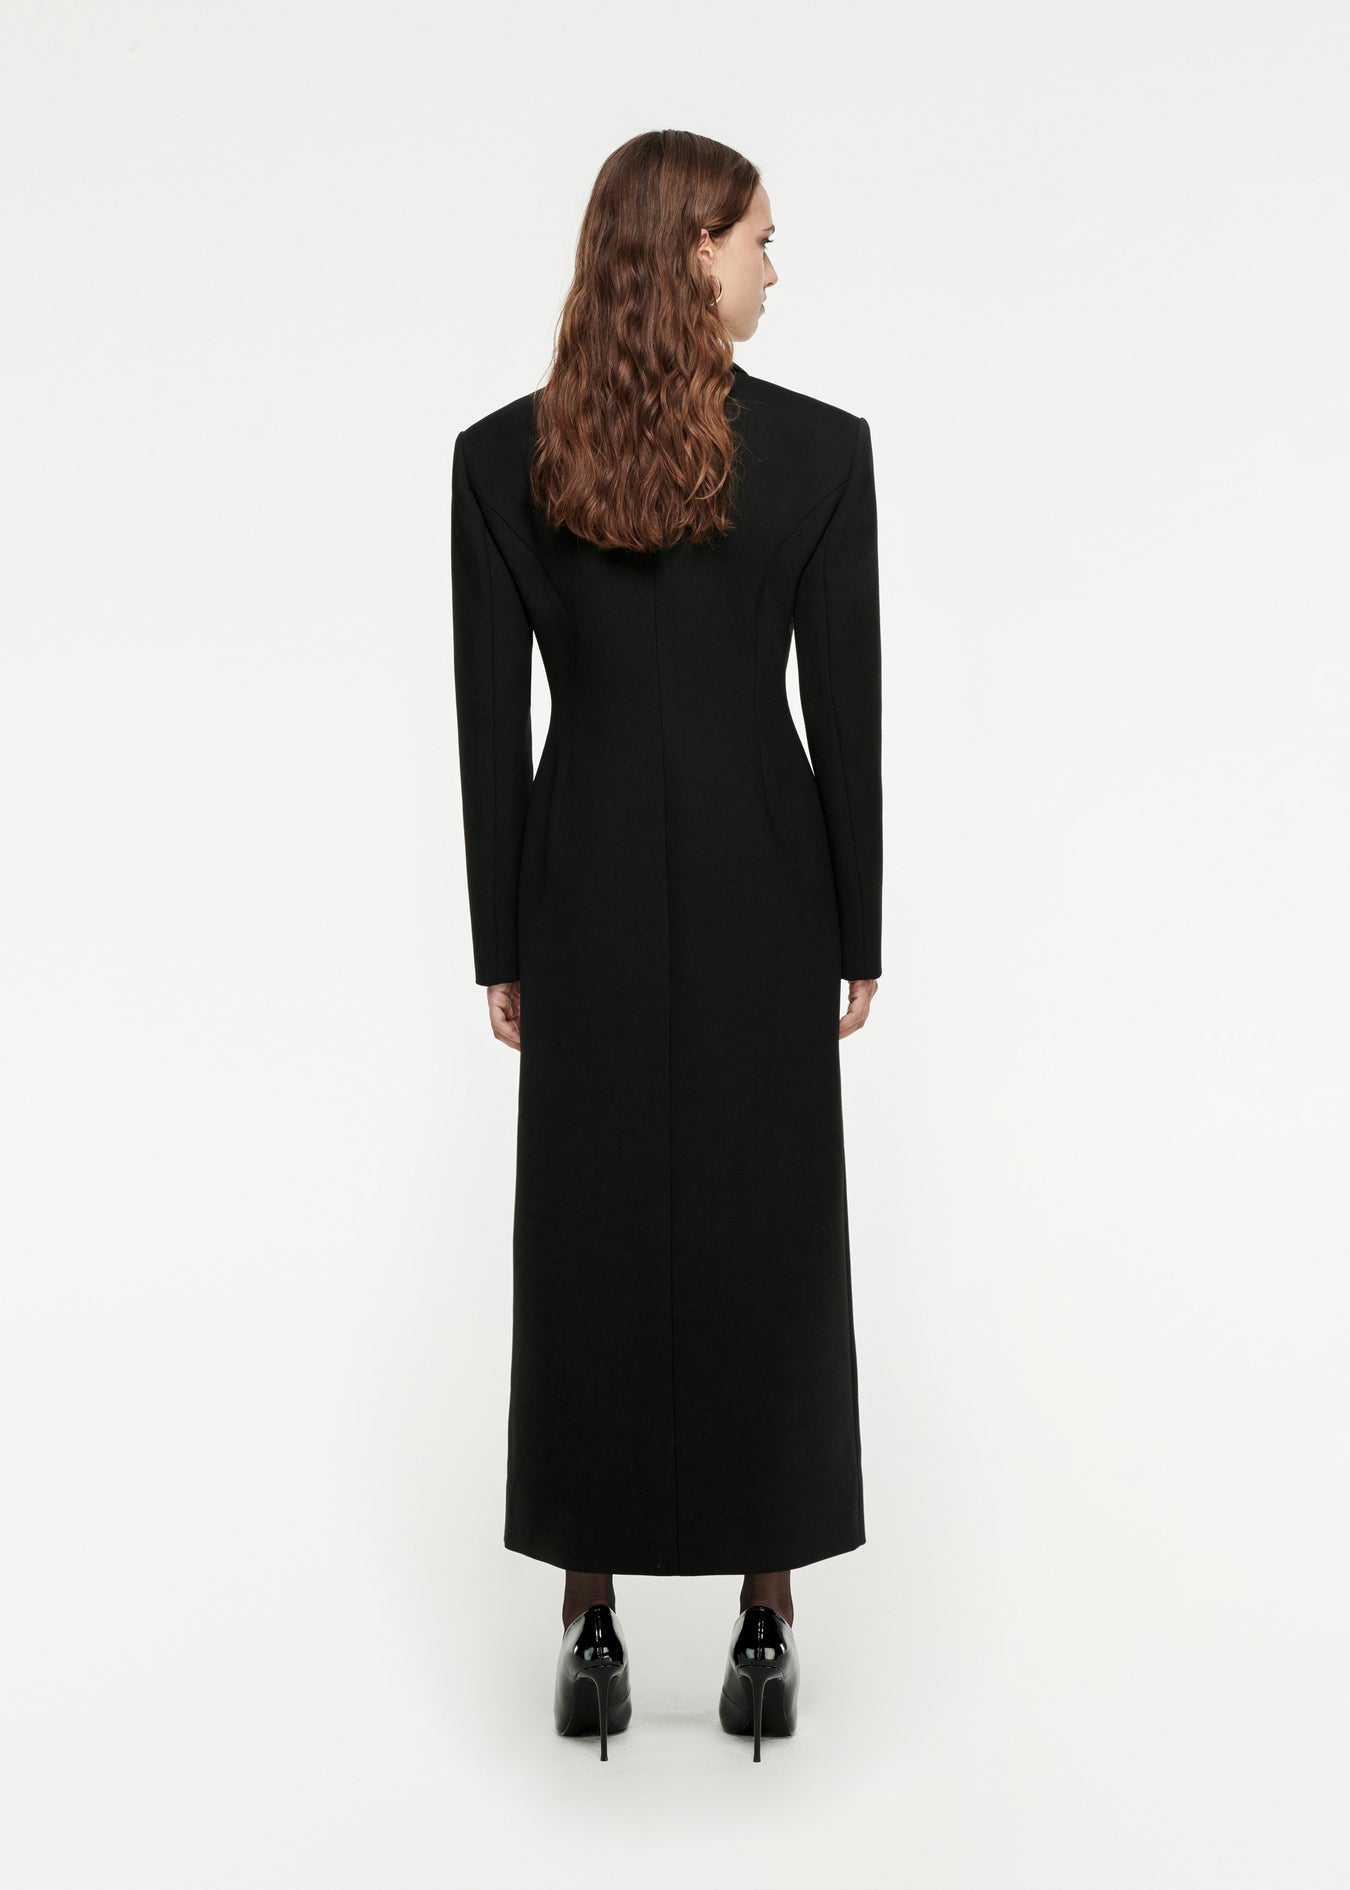 The back of a woman wearing the Double-Breasted Wool Coat in Black